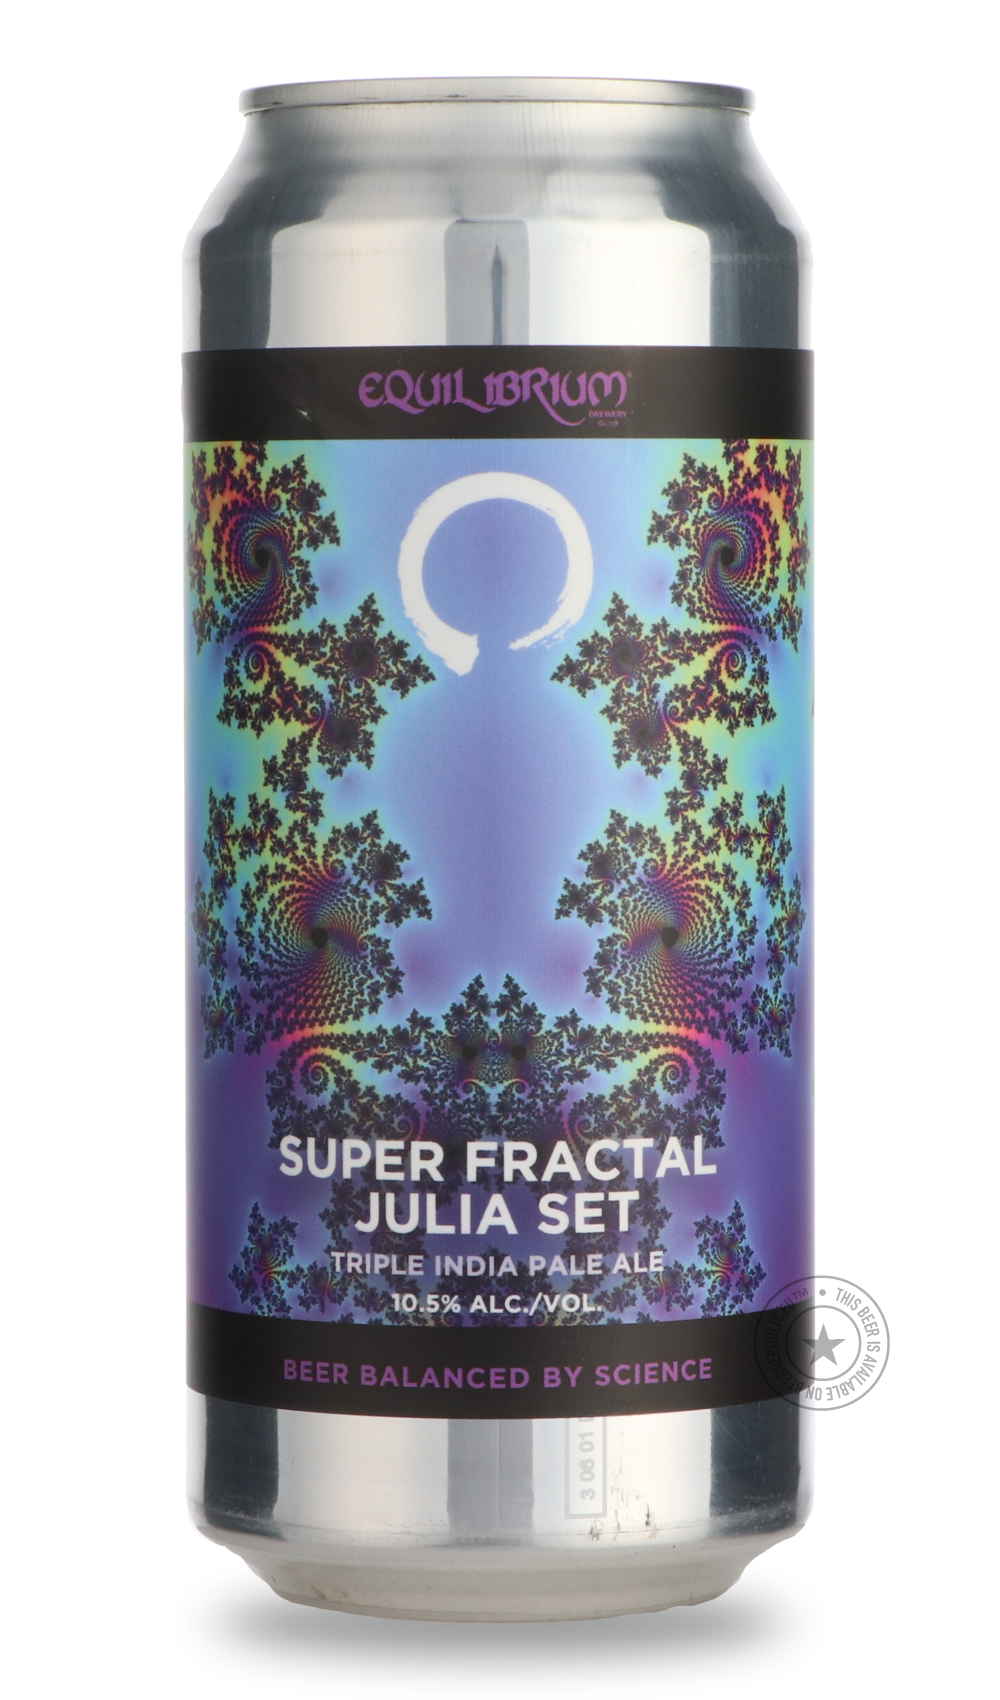 -Equilibrium- Super Fractal Julia Set-IPA- Only @ Beer Republic - The best online beer store for American & Canadian craft beer - Buy beer online from the USA and Canada - Bier online kopen - Amerikaans bier kopen - Craft beer store - Craft beer kopen - Amerikanisch bier kaufen - Bier online kaufen - Acheter biere online - IPA - Stout - Porter - New England IPA - Hazy IPA - Imperial Stout - Barrel Aged - Barrel Aged Imperial Stout - Brown - Dark beer - Blond - Blonde - Pilsner - Lager - Wheat - Weizen - Amb